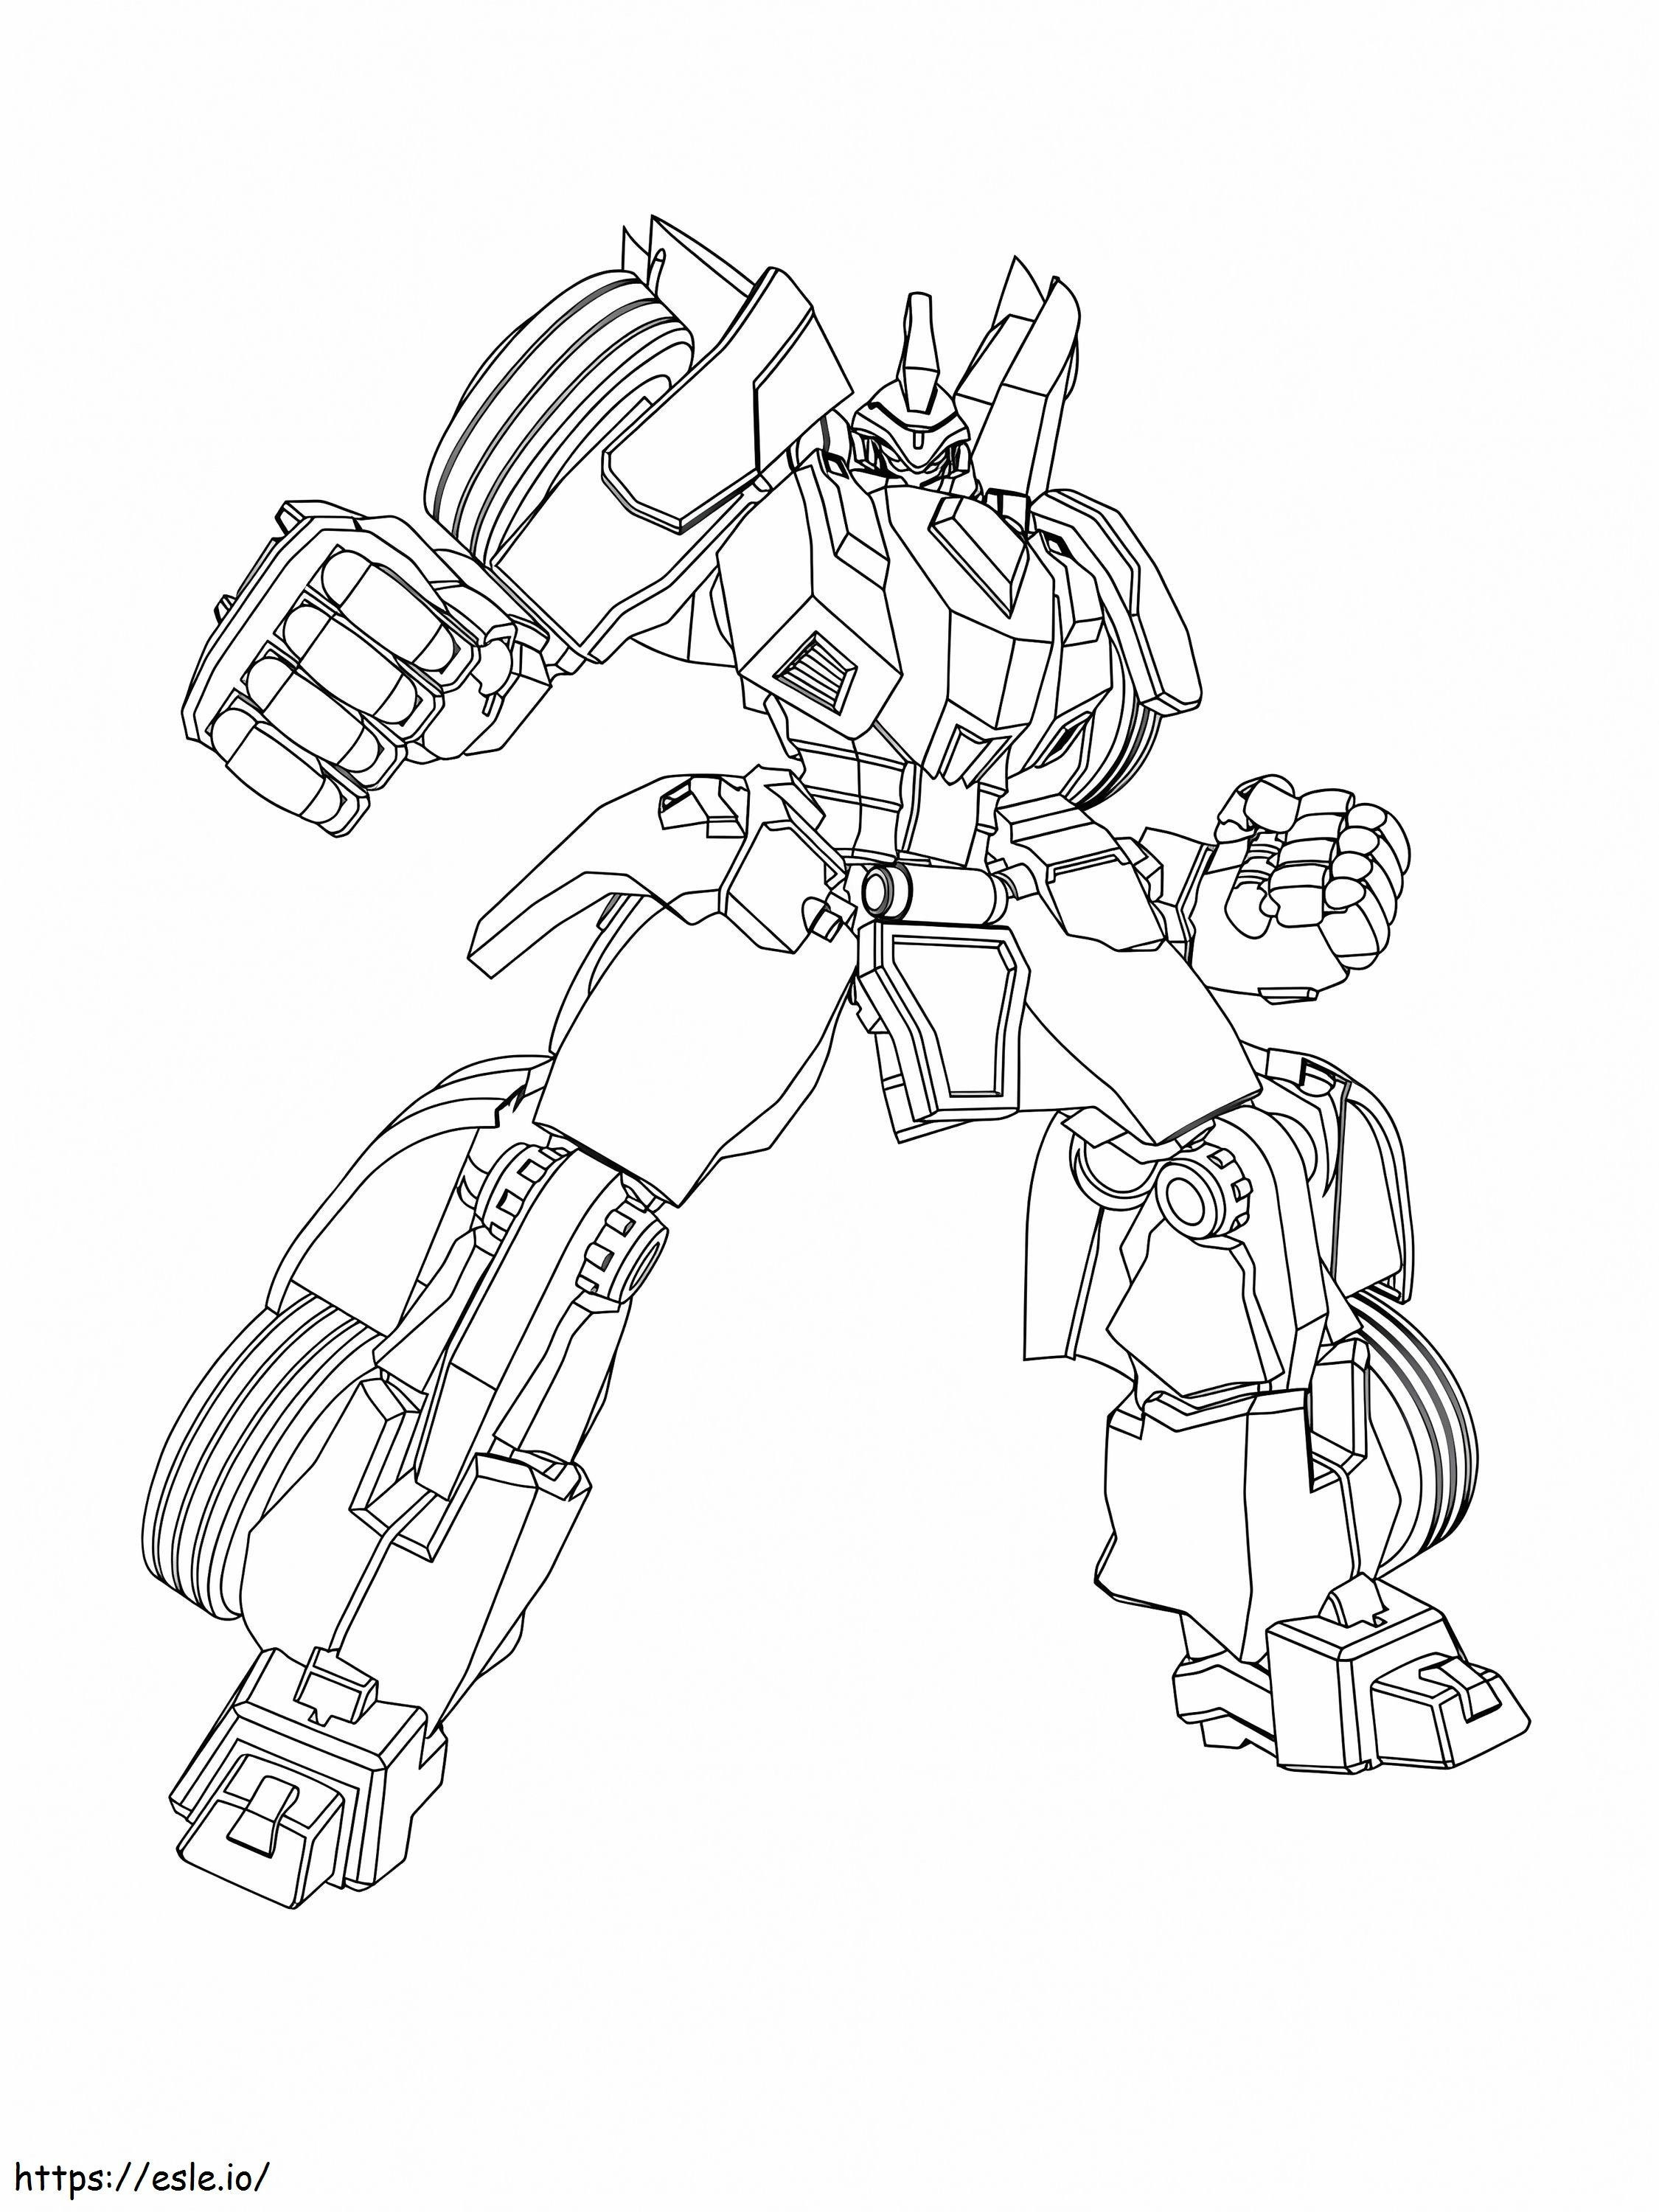 Tobot 3 coloring page